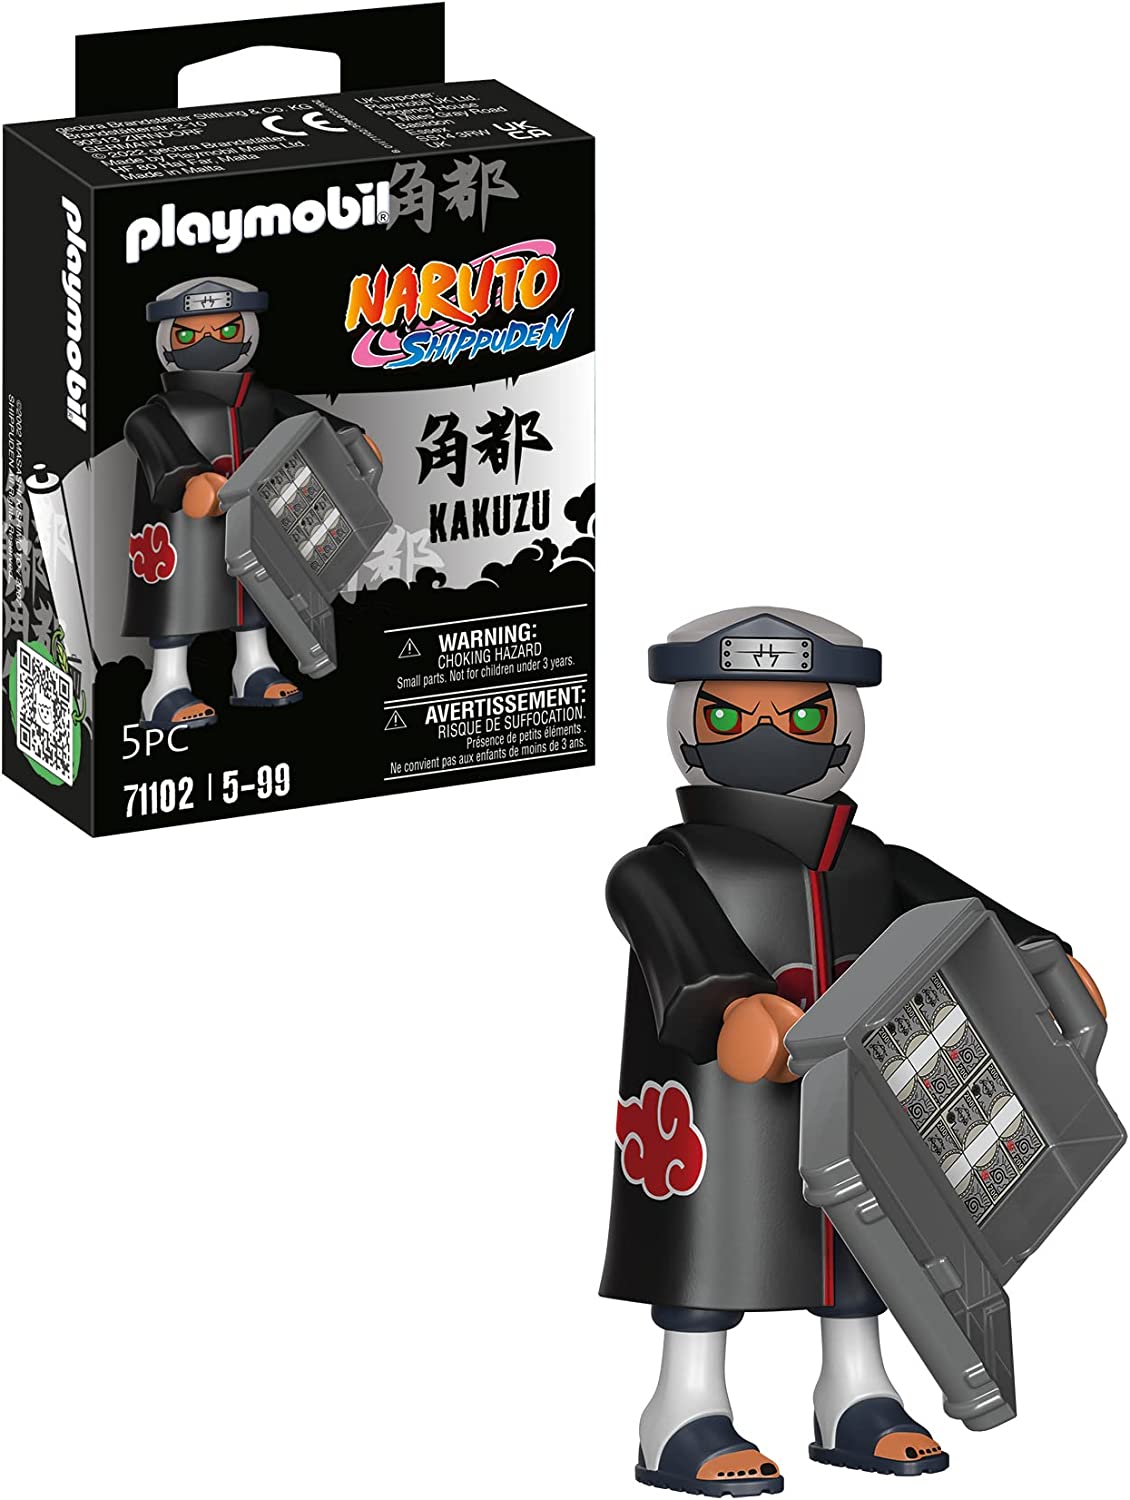 Playmobil Naruto Shippuden 71102 Kakuzu in Black Coat with Red Clouds and Case, Creative Fun for Anime Fans With Great Details and Authentic Extras, 5 Pieces, From 5 Years